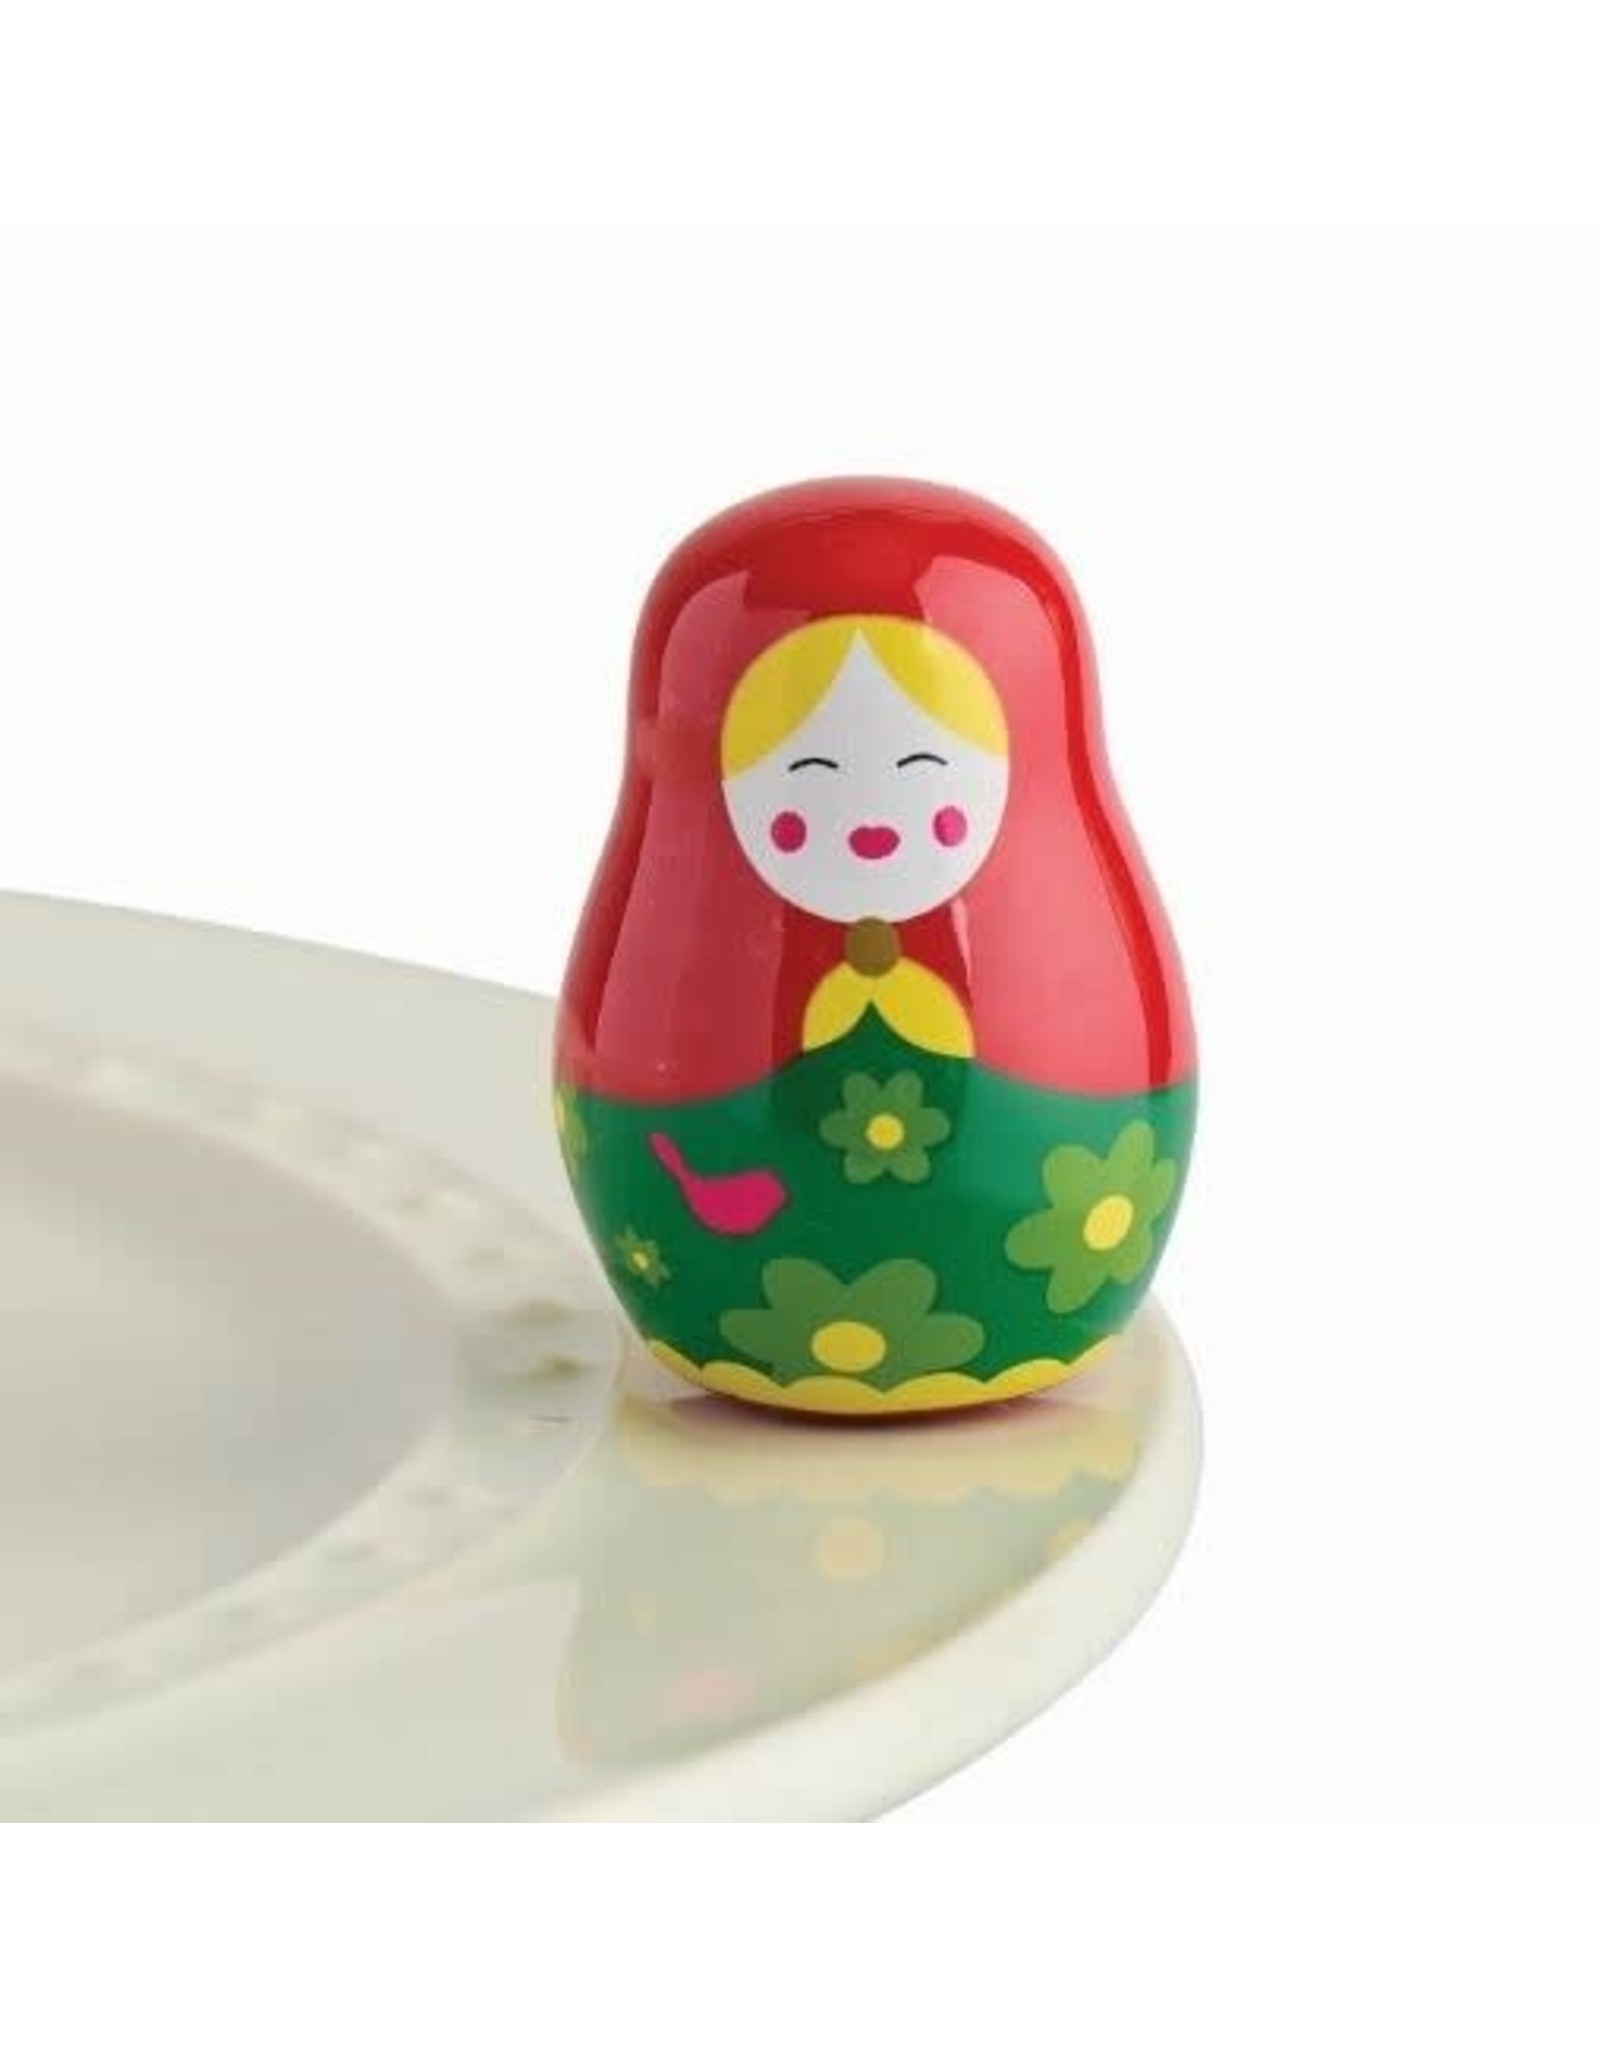 The Ritzy Gypsy ALL DOLLED UP (nesting doll)